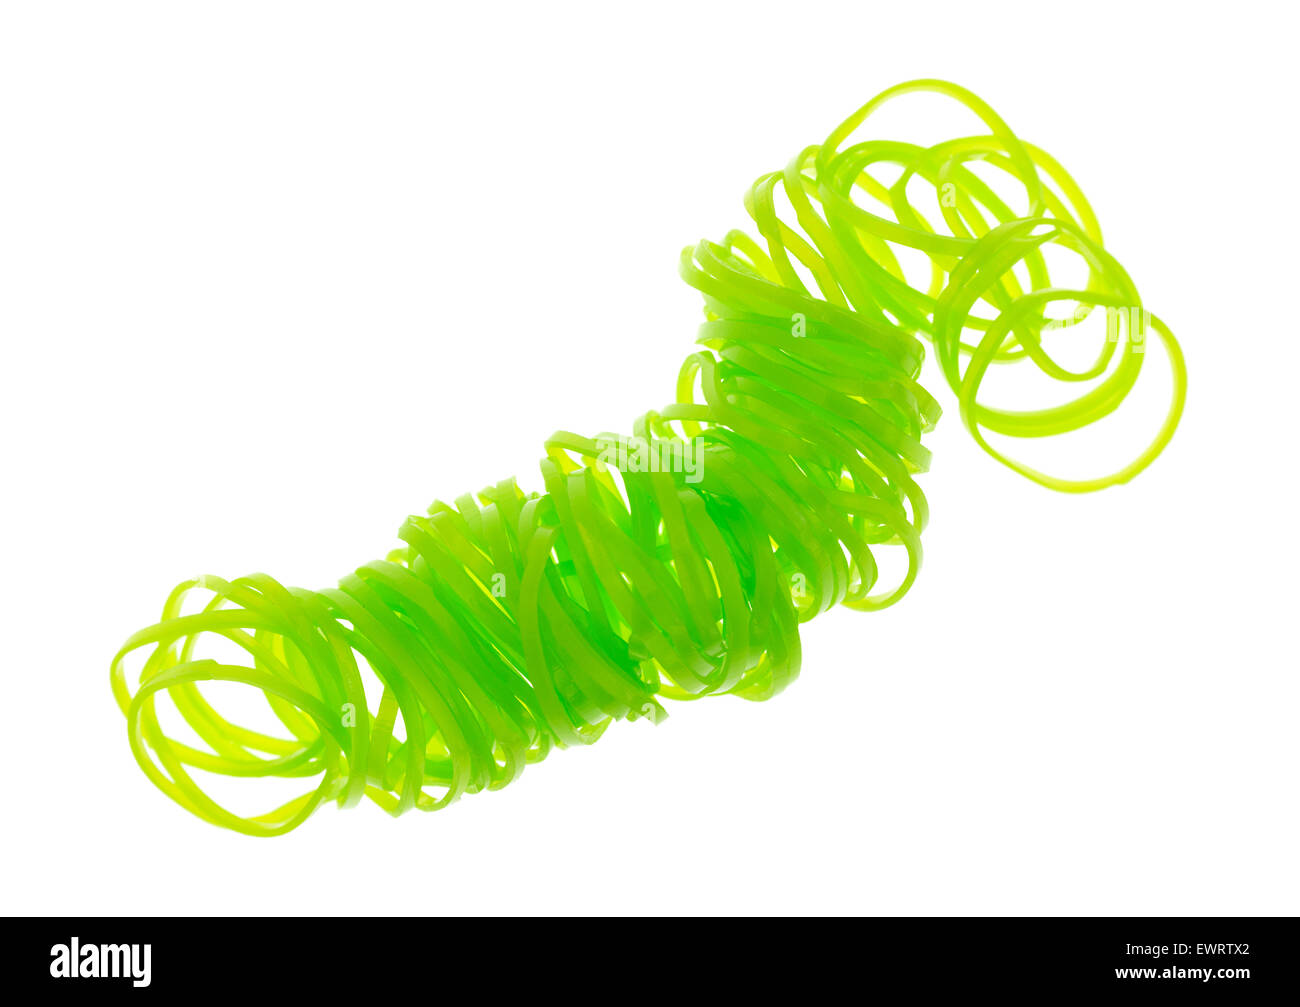 A group of small neon green rubber bands used for hair ponytails on a white background. Stock Photo